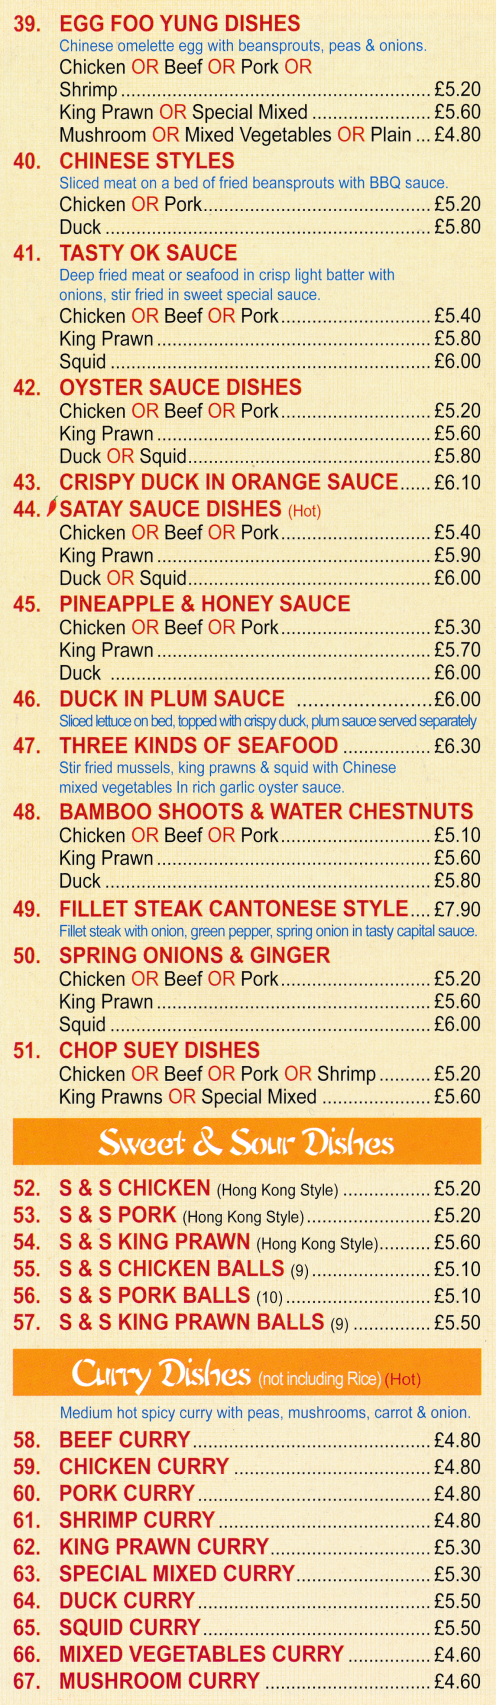 Menu for China City Chinese takeaway (Chop Suey, Tasty OK sauce, Egg Foo Yung, Oyster sauce, Duck in Plum sauce..)